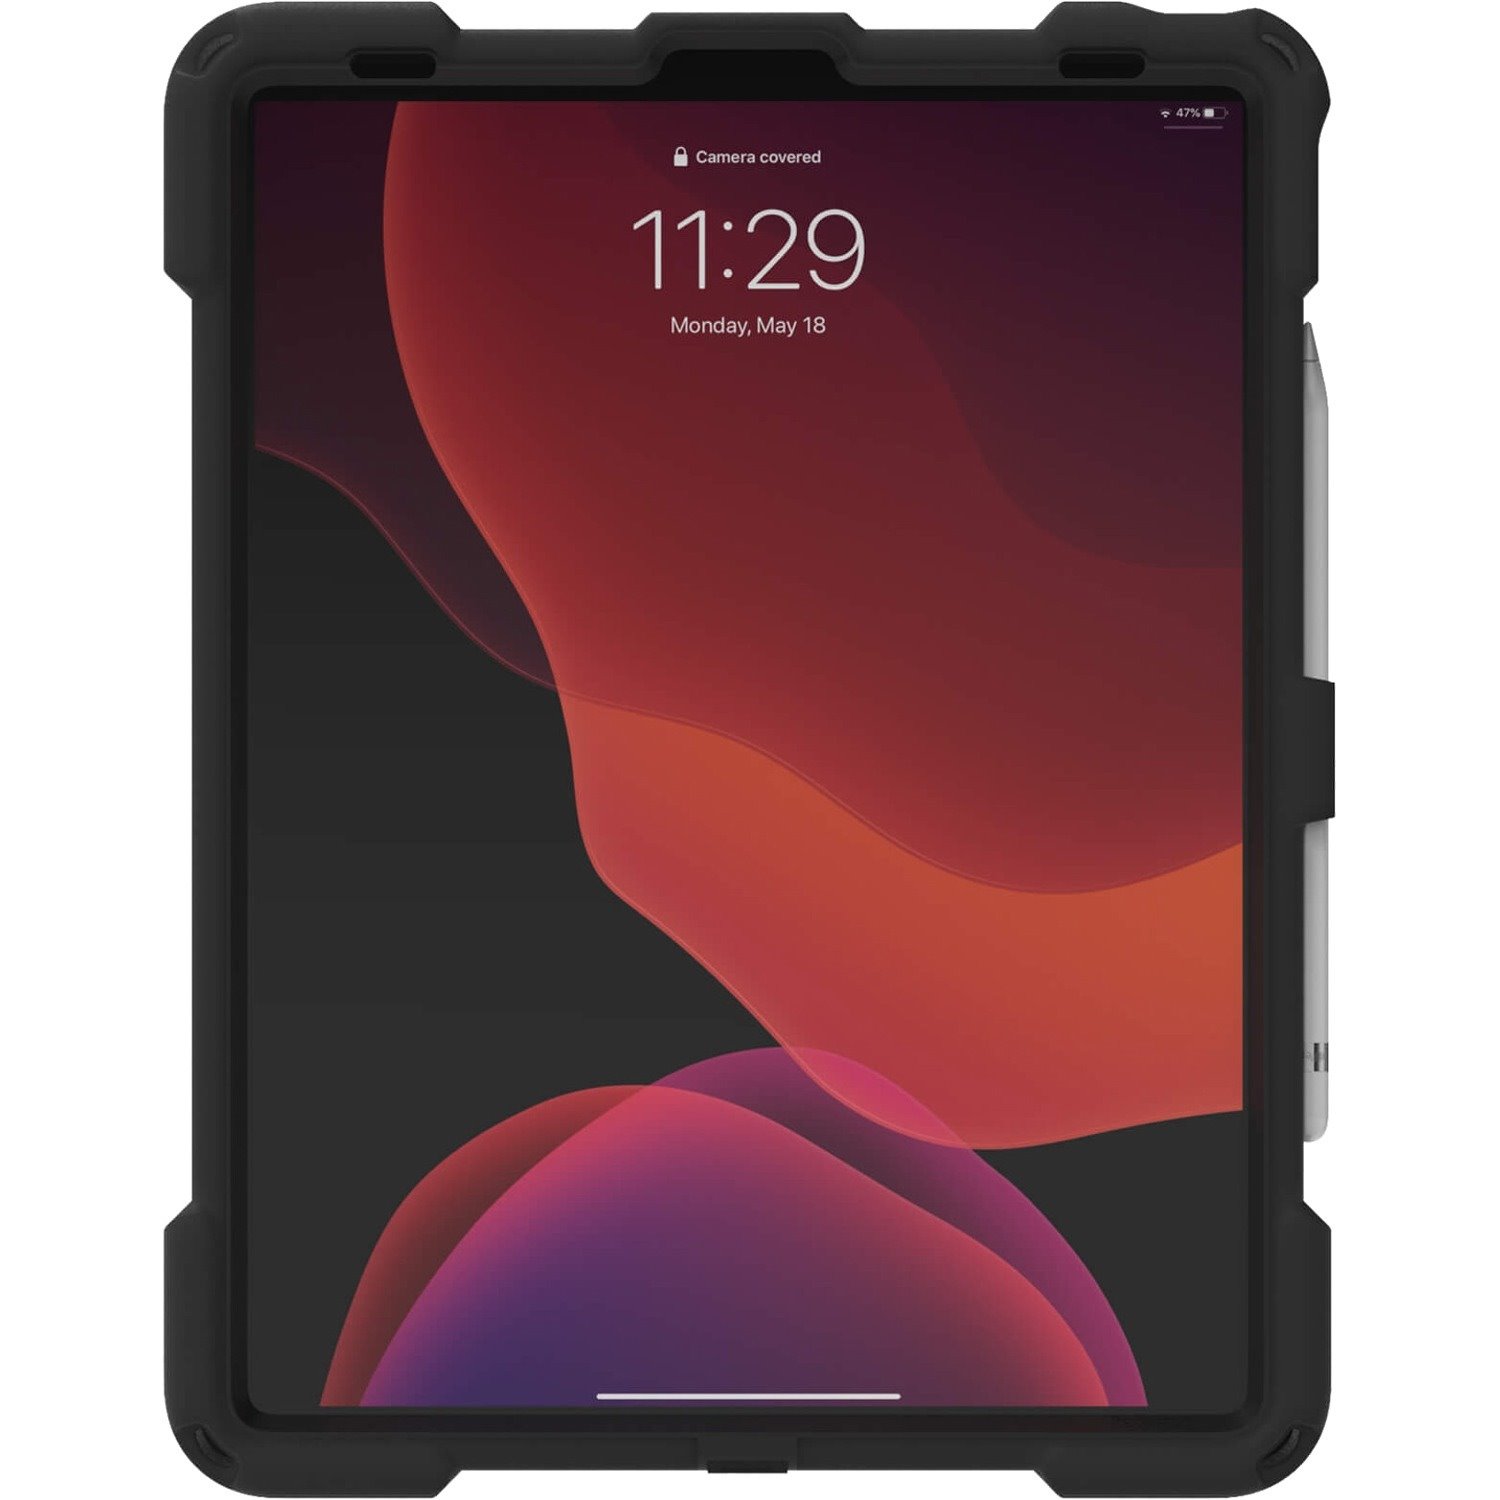 The Joy Factory aXtion Bold MP Rugged Carrying Case for 12.9" Apple iPad Pro (4th Generation), iPad Pro (5th Generation), iPad Pro (6th Generation) Tablet - Black